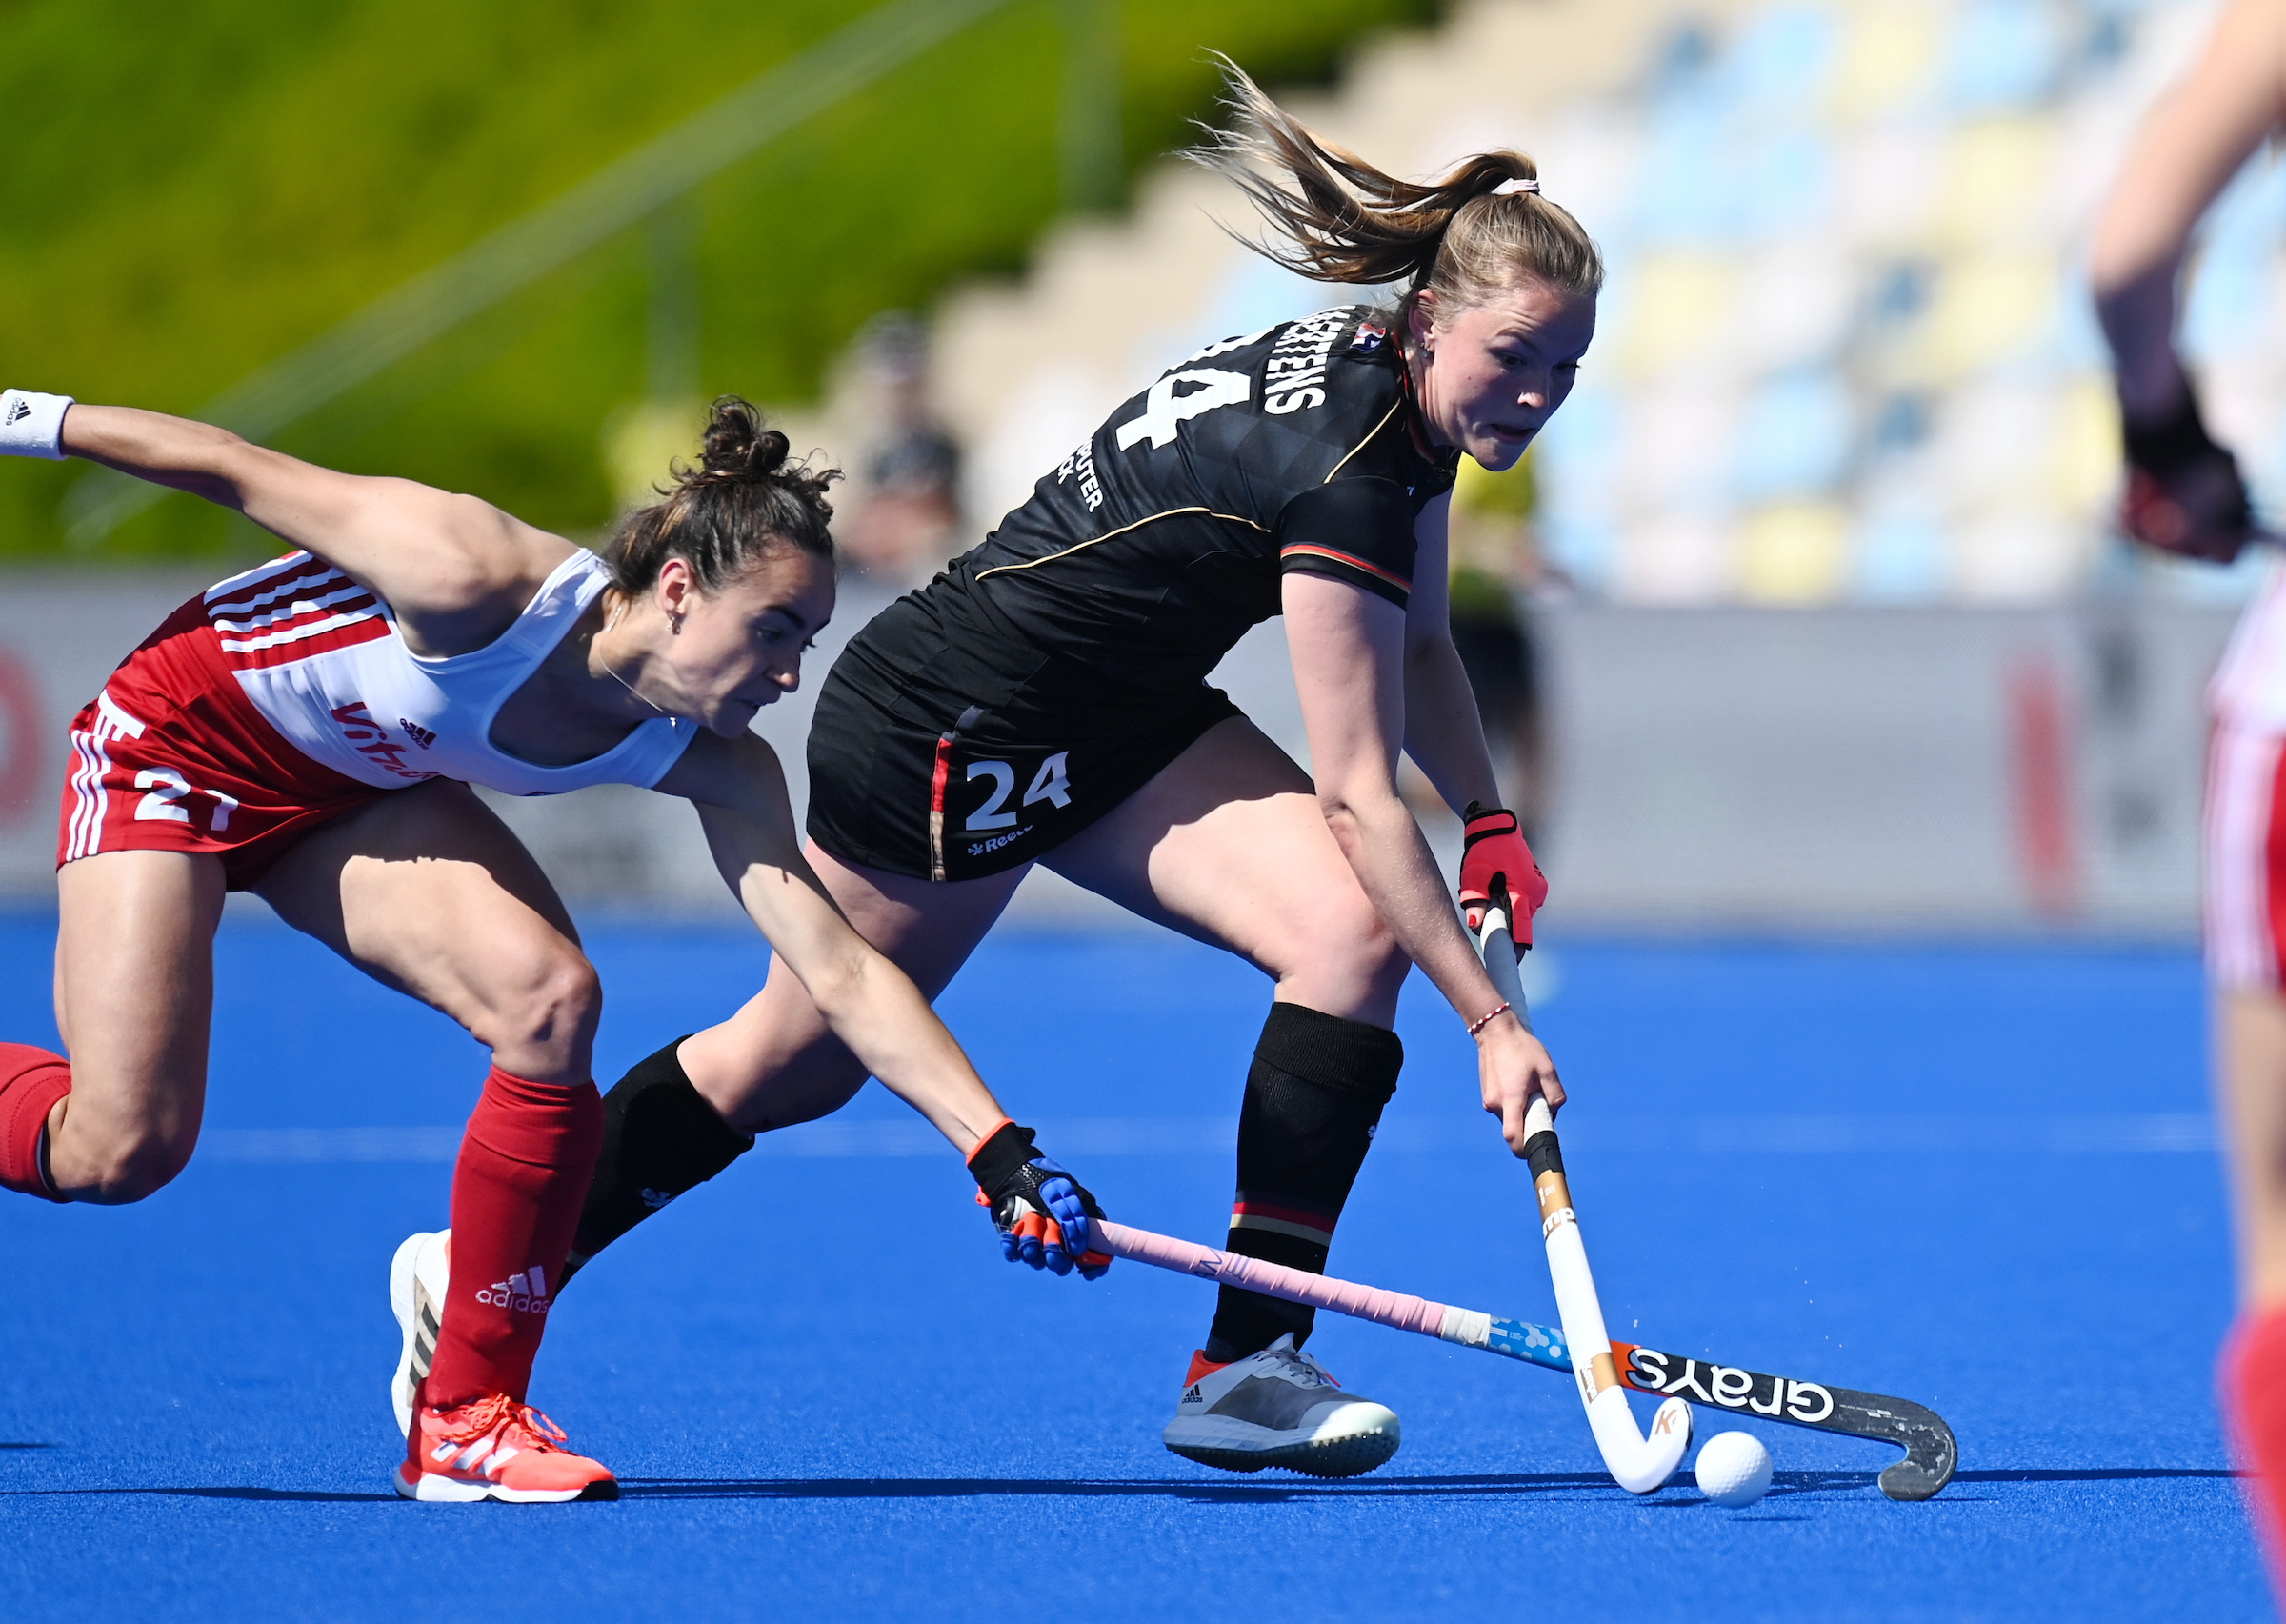 WSP2205040867 - Pro-League: The Danas Narrowly Lose 4-3 to Athletic England Women - In the FIH Pro League, the Danas met the English selection today, May 4th. In the first of two games at SparkassenPark Mönchengladbach, coach Valentin Altenburg's team had to admit defeat 3:4 after 60 minutes. The goals for Germany were scored by Hannah Gablac, Nike Lorenz and Sonja Zimmermann. Tessa Howard, Grace Balsdon and twice Darcy Bourne scored for the England.